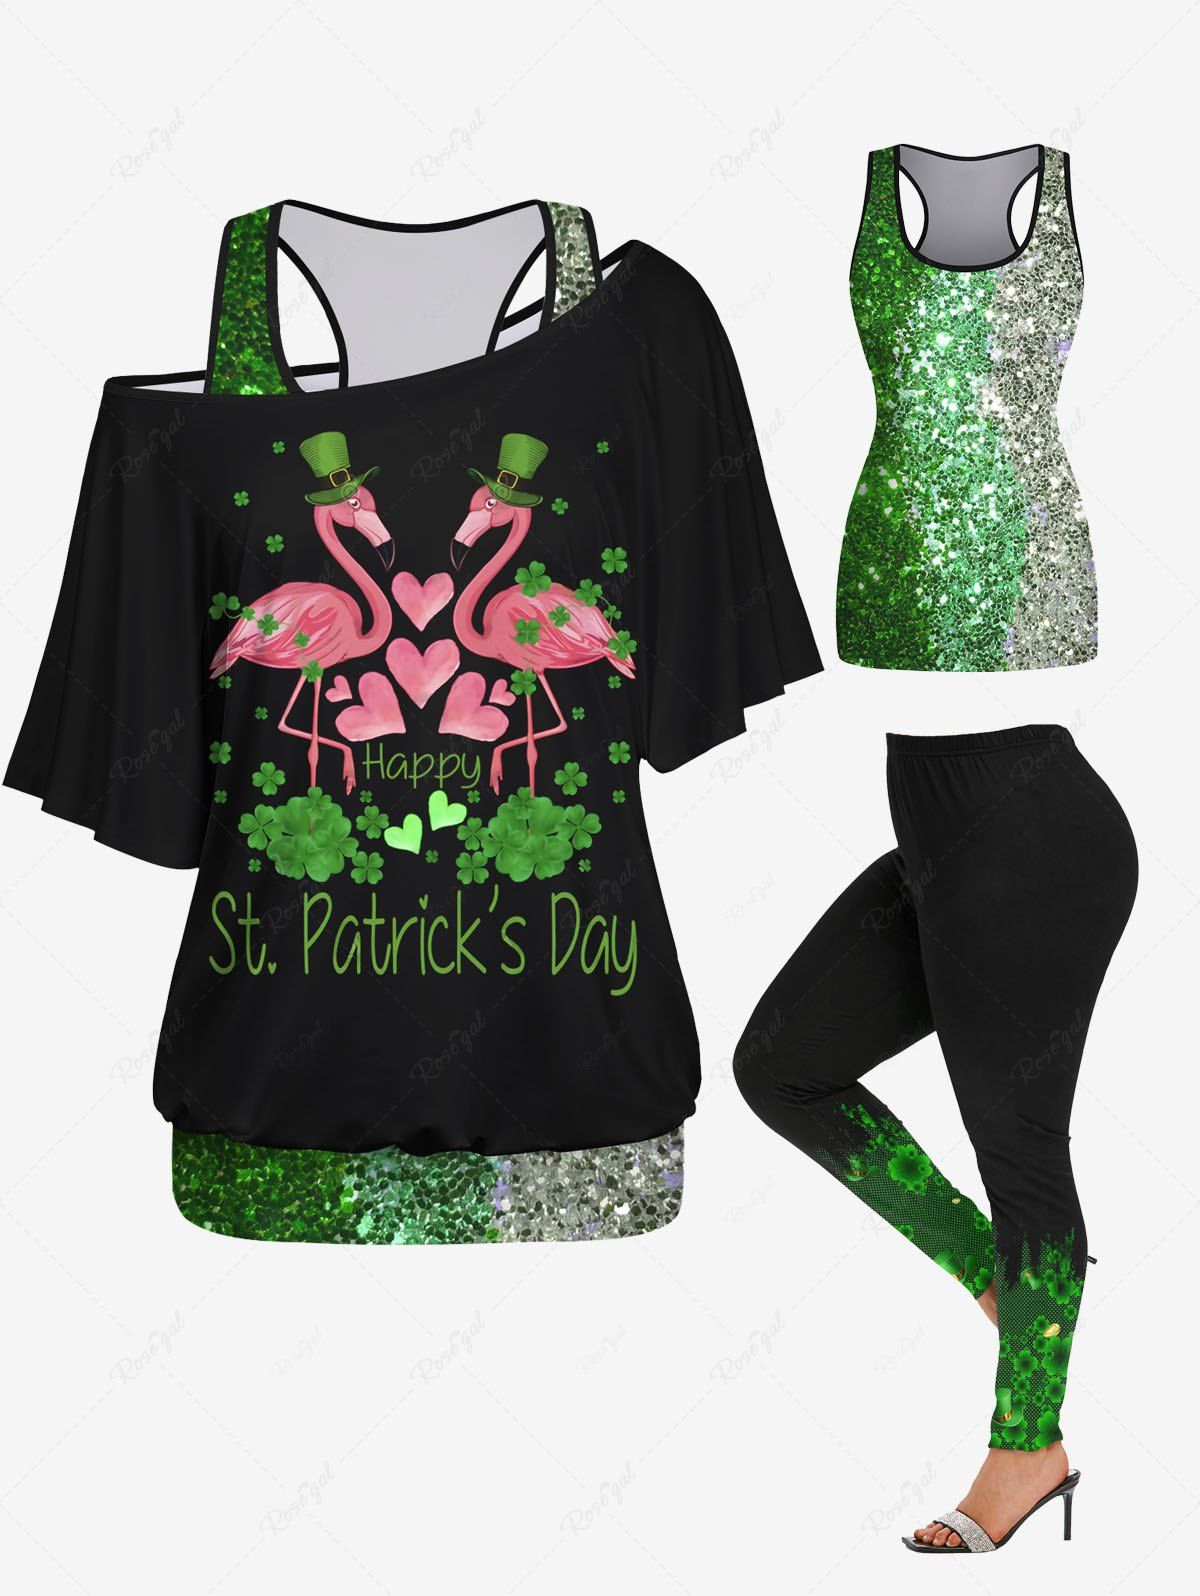 Shop Glitter Sparkling Sequins Printed Racerback Tank Top and Crane Heart Four Leaf Clover Graphic St. Patrick's Day T-shirt Set and Leggings Plus Size Outfit  